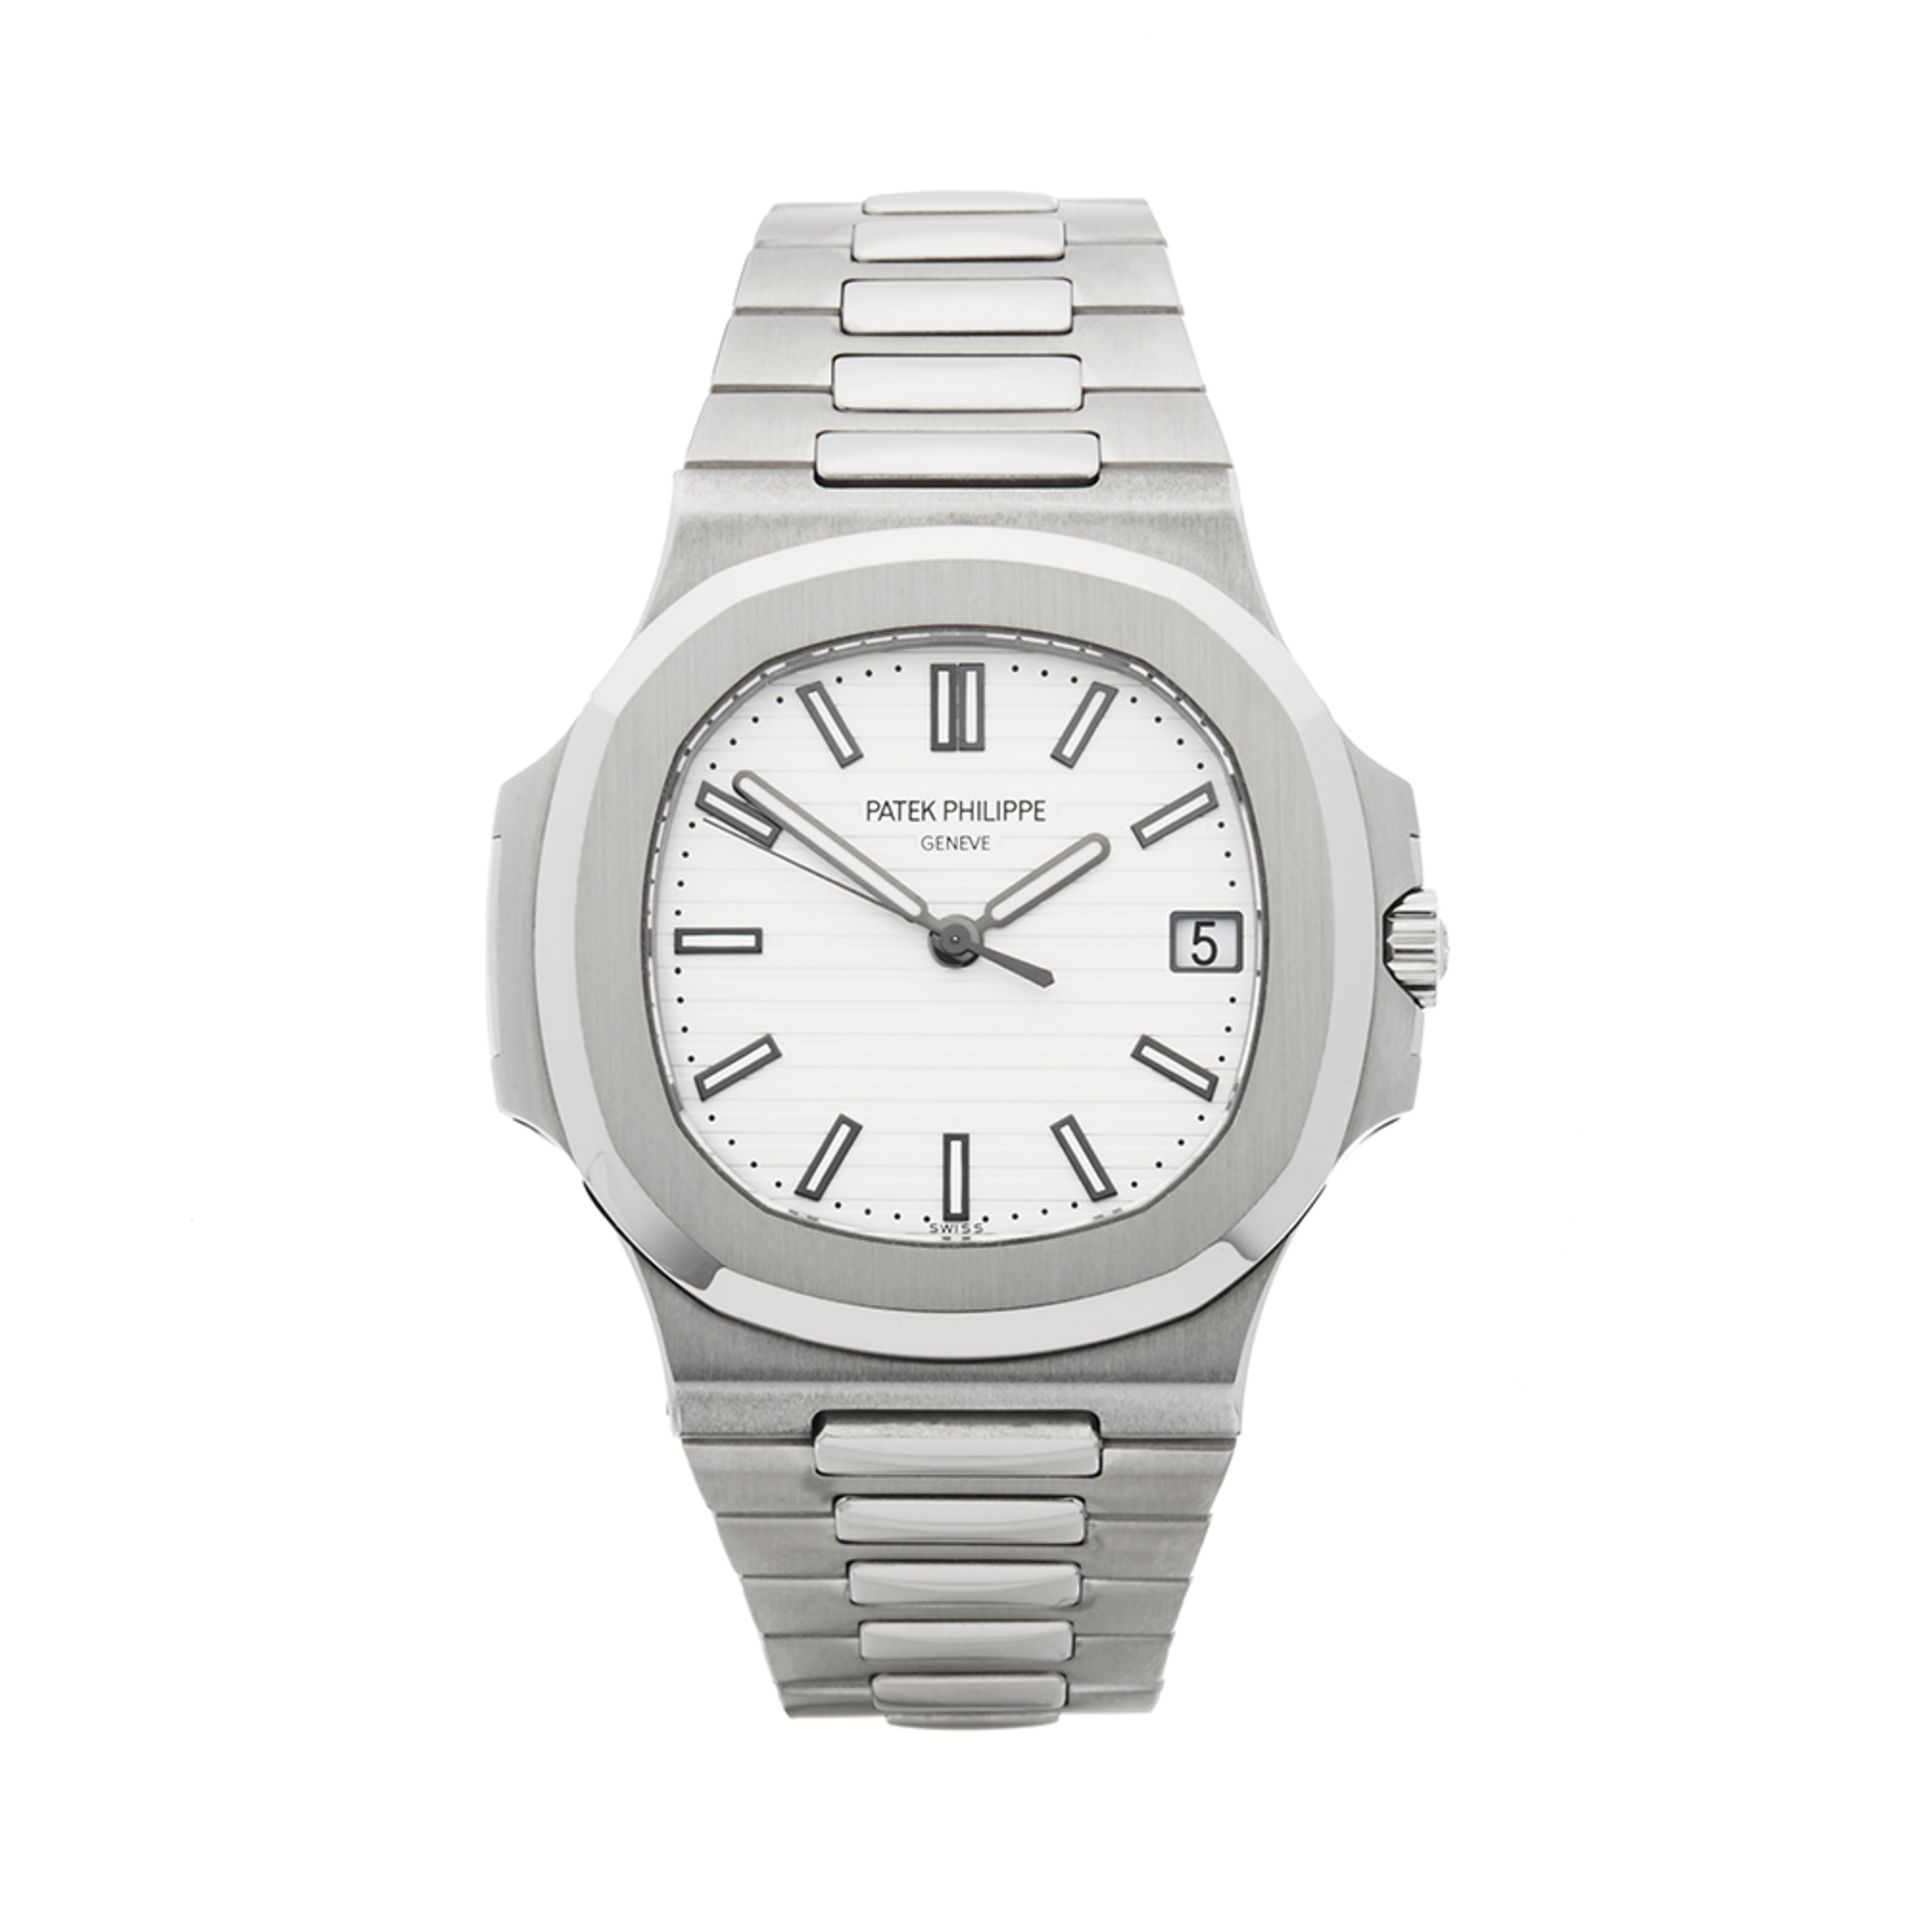 Patek Philippe Nautilus 40mm Stainless Steel - 5711 1A/011 - Image 2 of 8